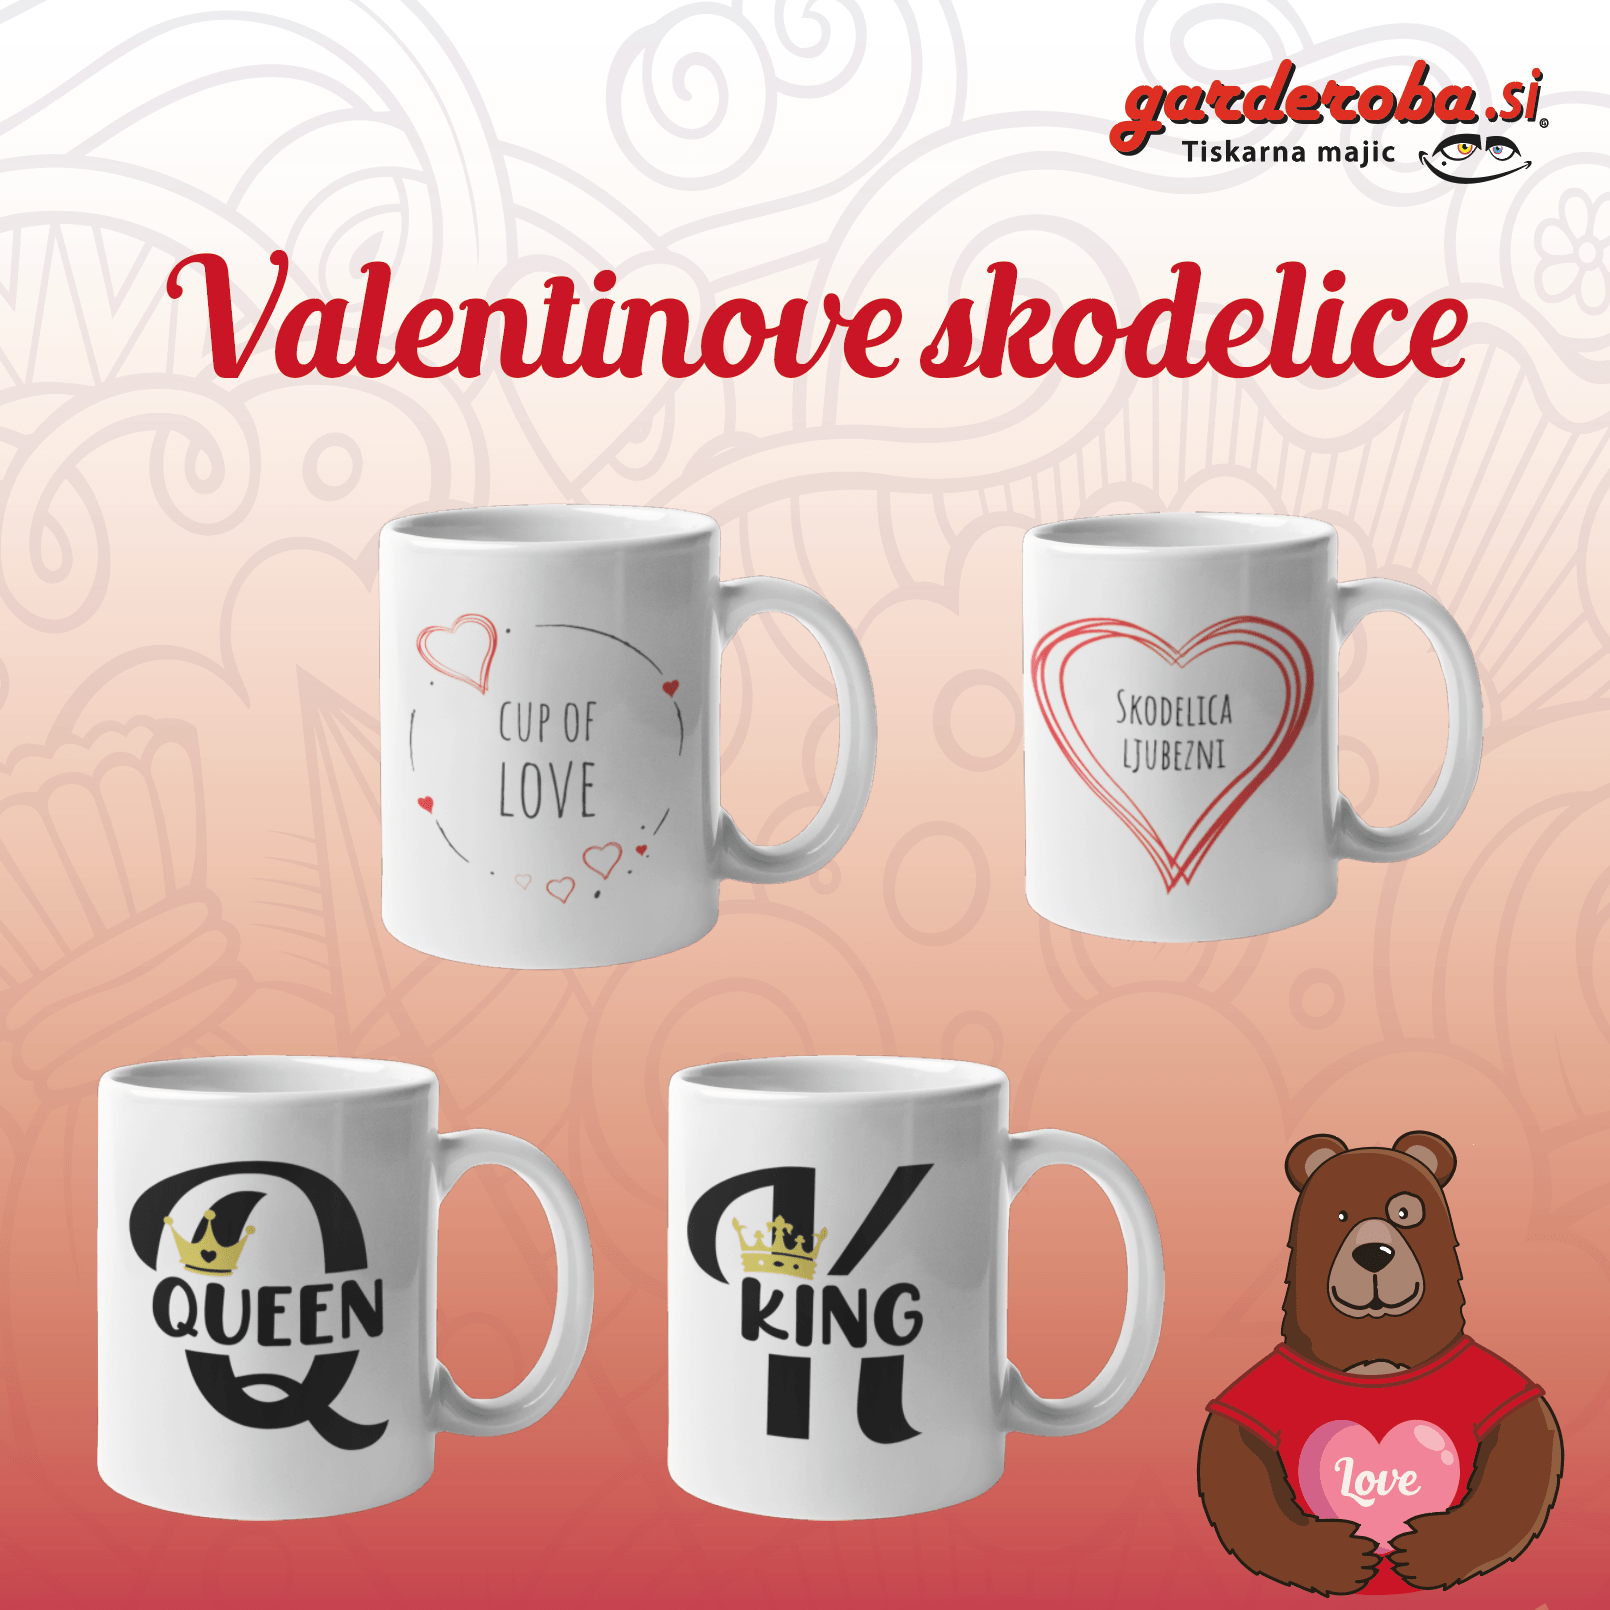 Gifts for valentine's garderoba